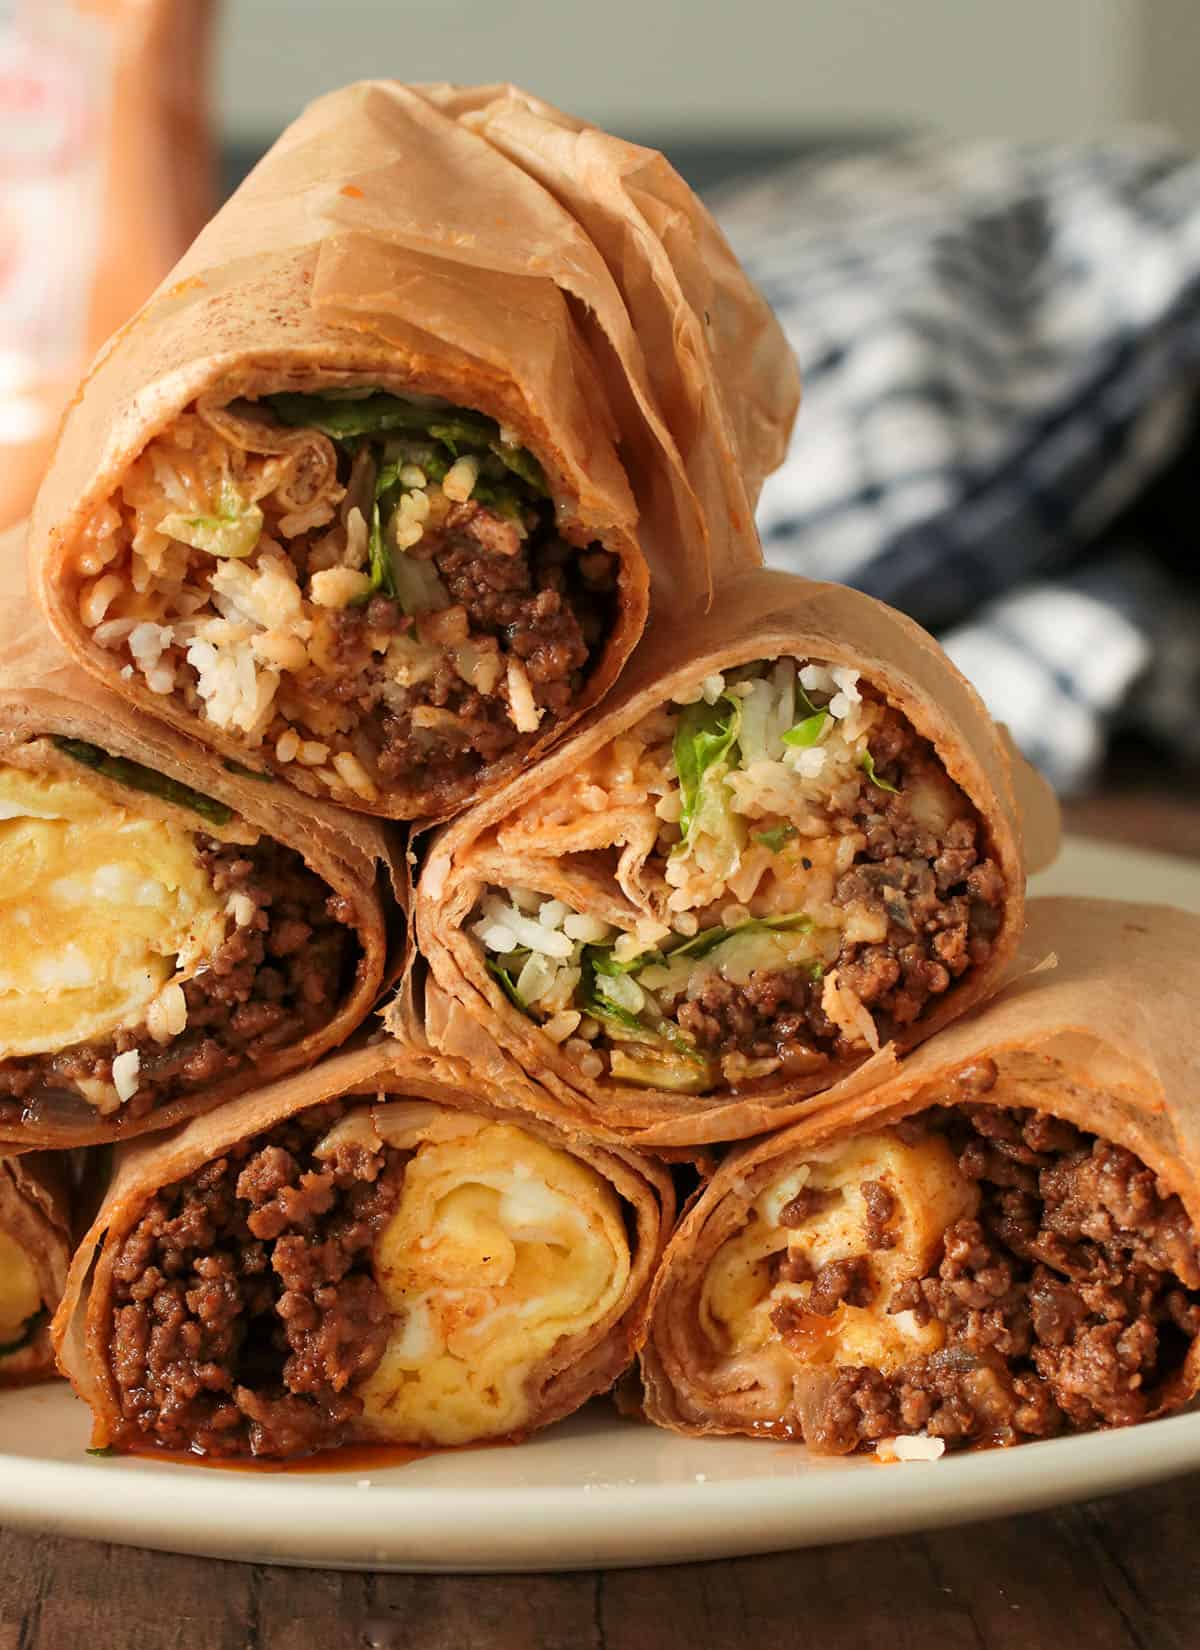 Beef burrito halves stacked together.